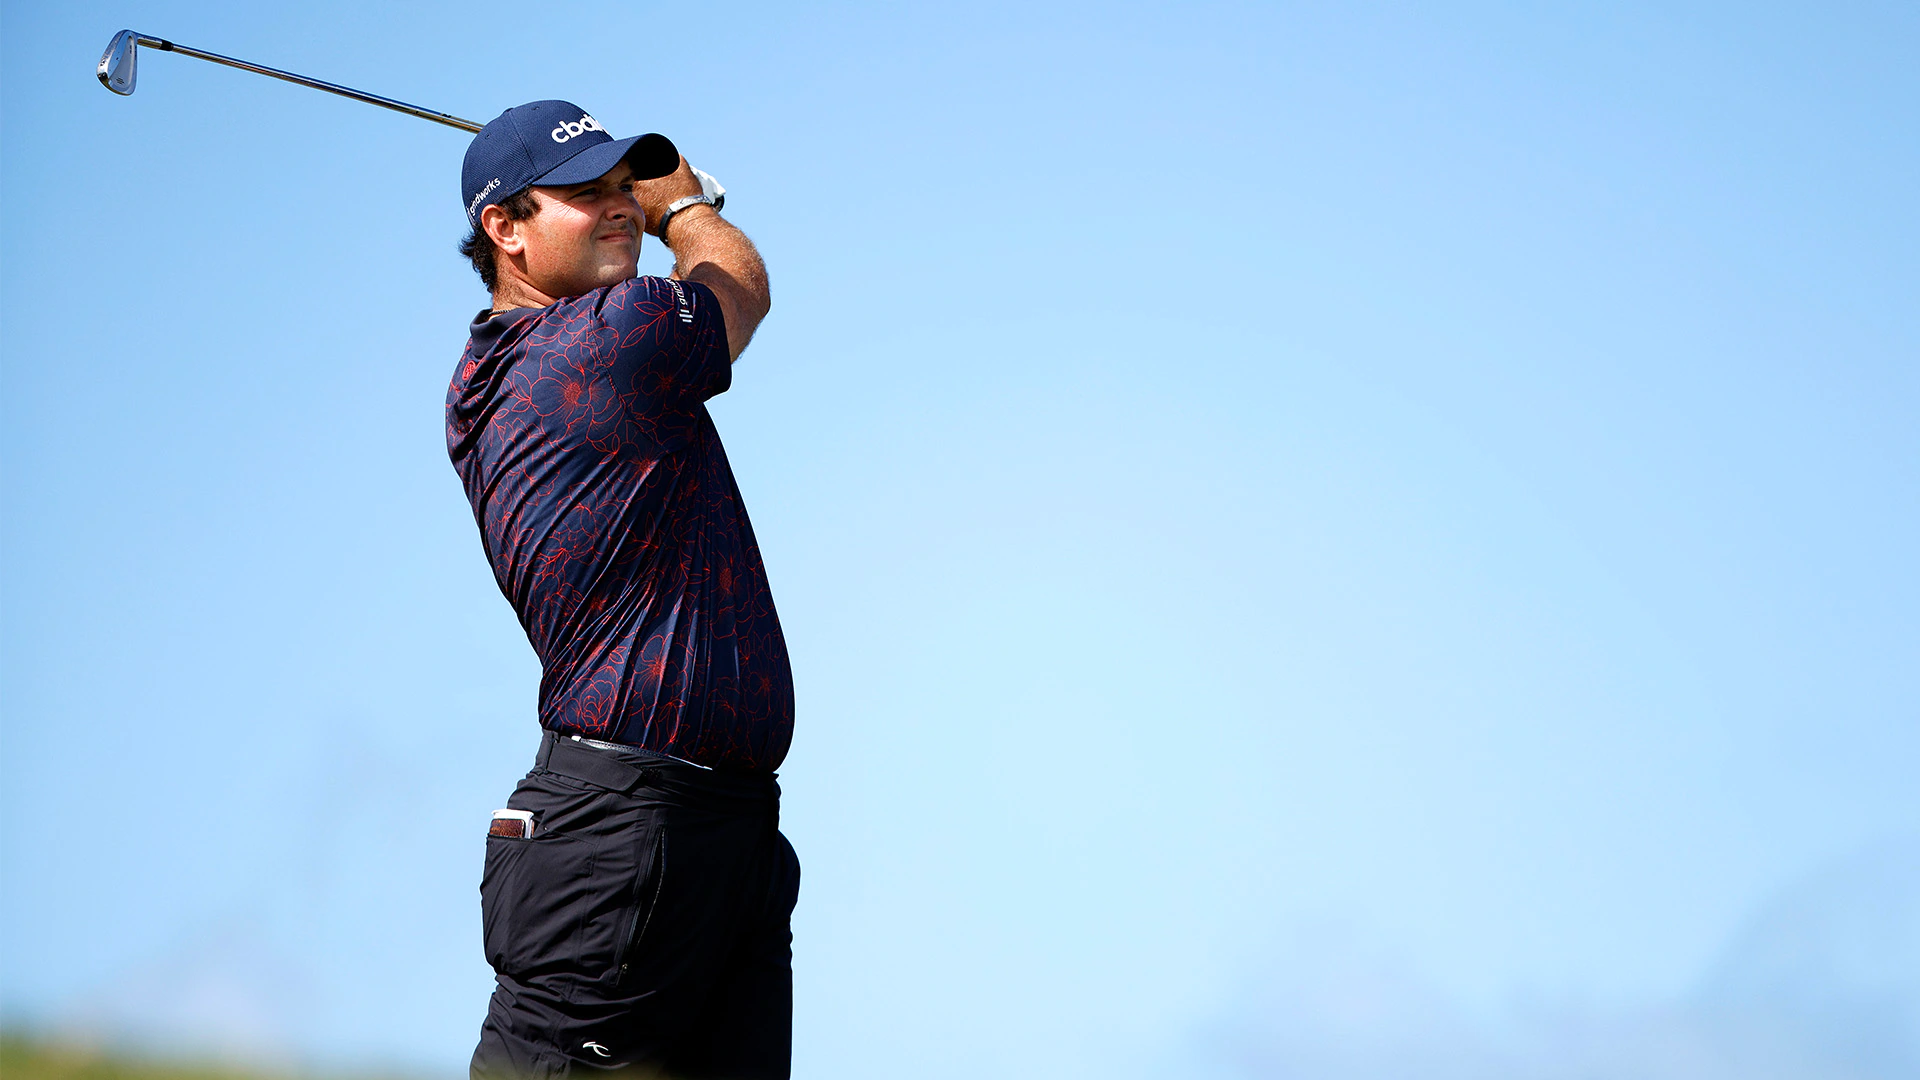 Watch: Patrick Reed holes eagle at Bermuda Champ. after taking penalty drop